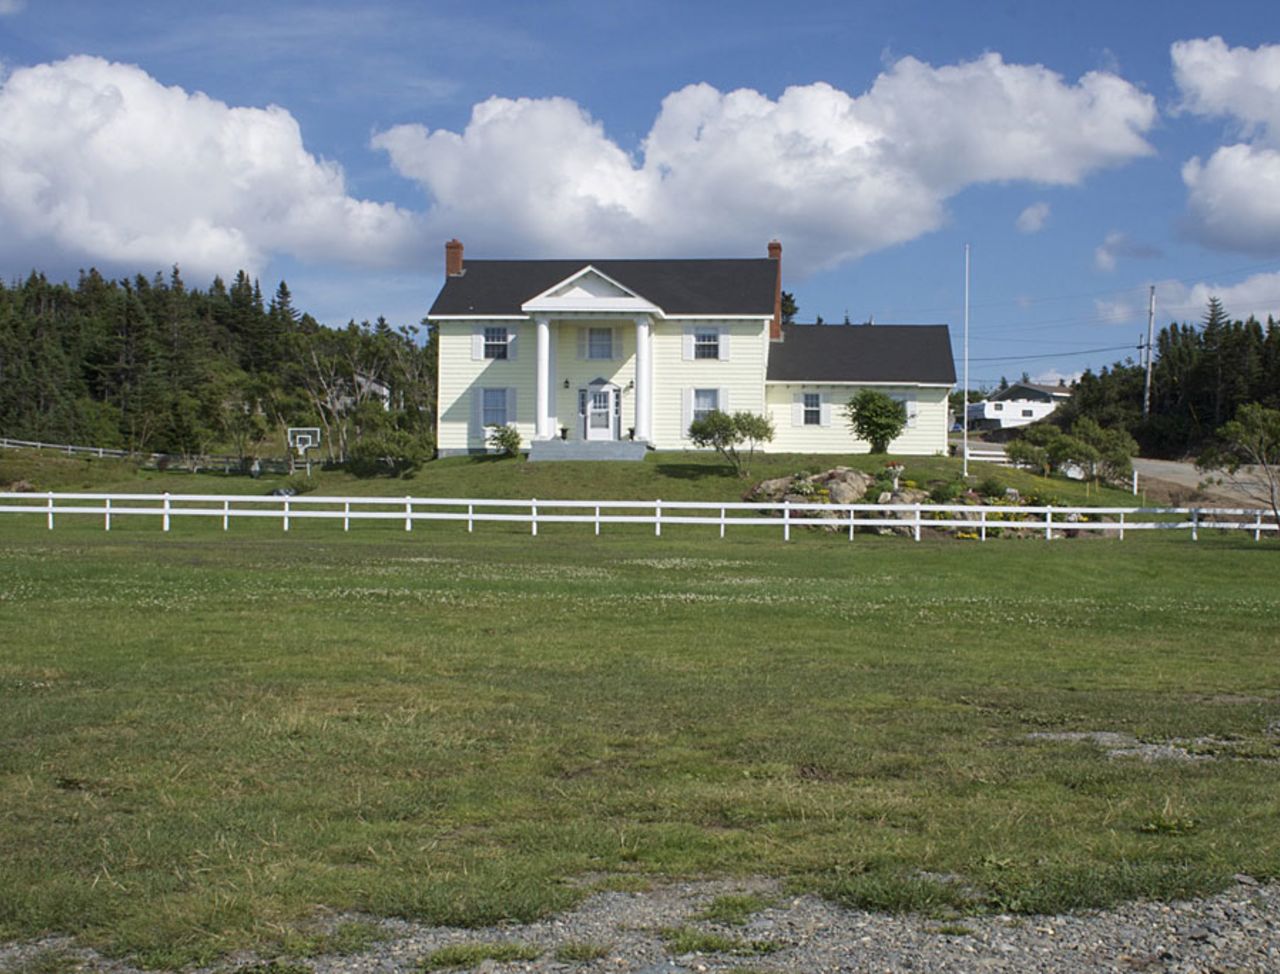 A view of the cricket ground in the harbour town of Twillingate, Newfoundland